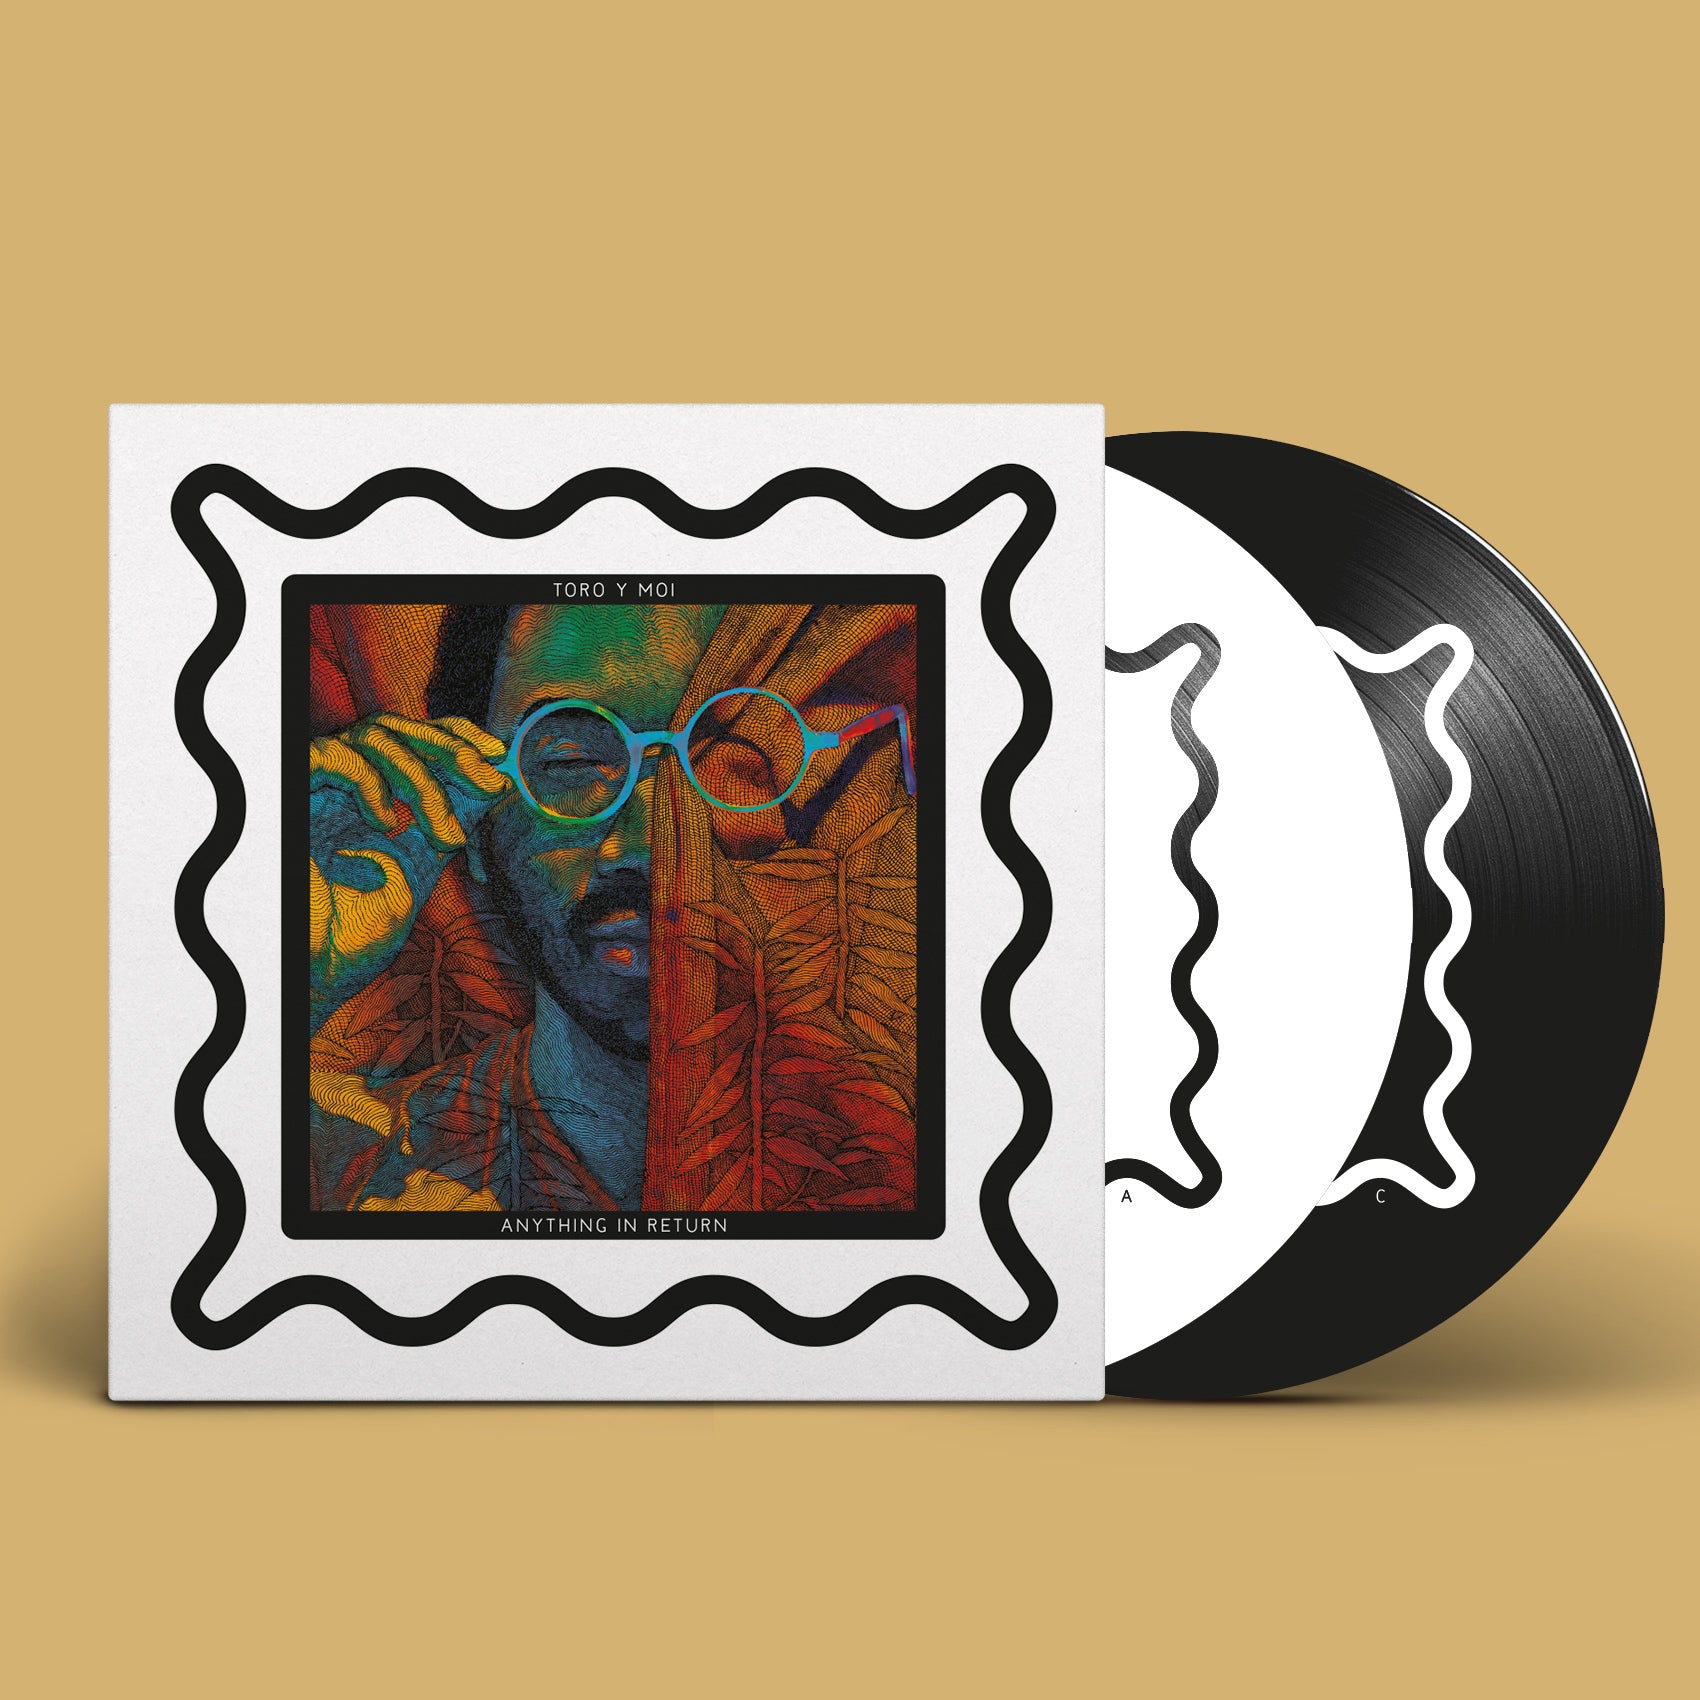 Toro Y Moi - Anything In Return (10th Anniversary): Limited Edition Squiggly Black + White Picture Disc 2LP